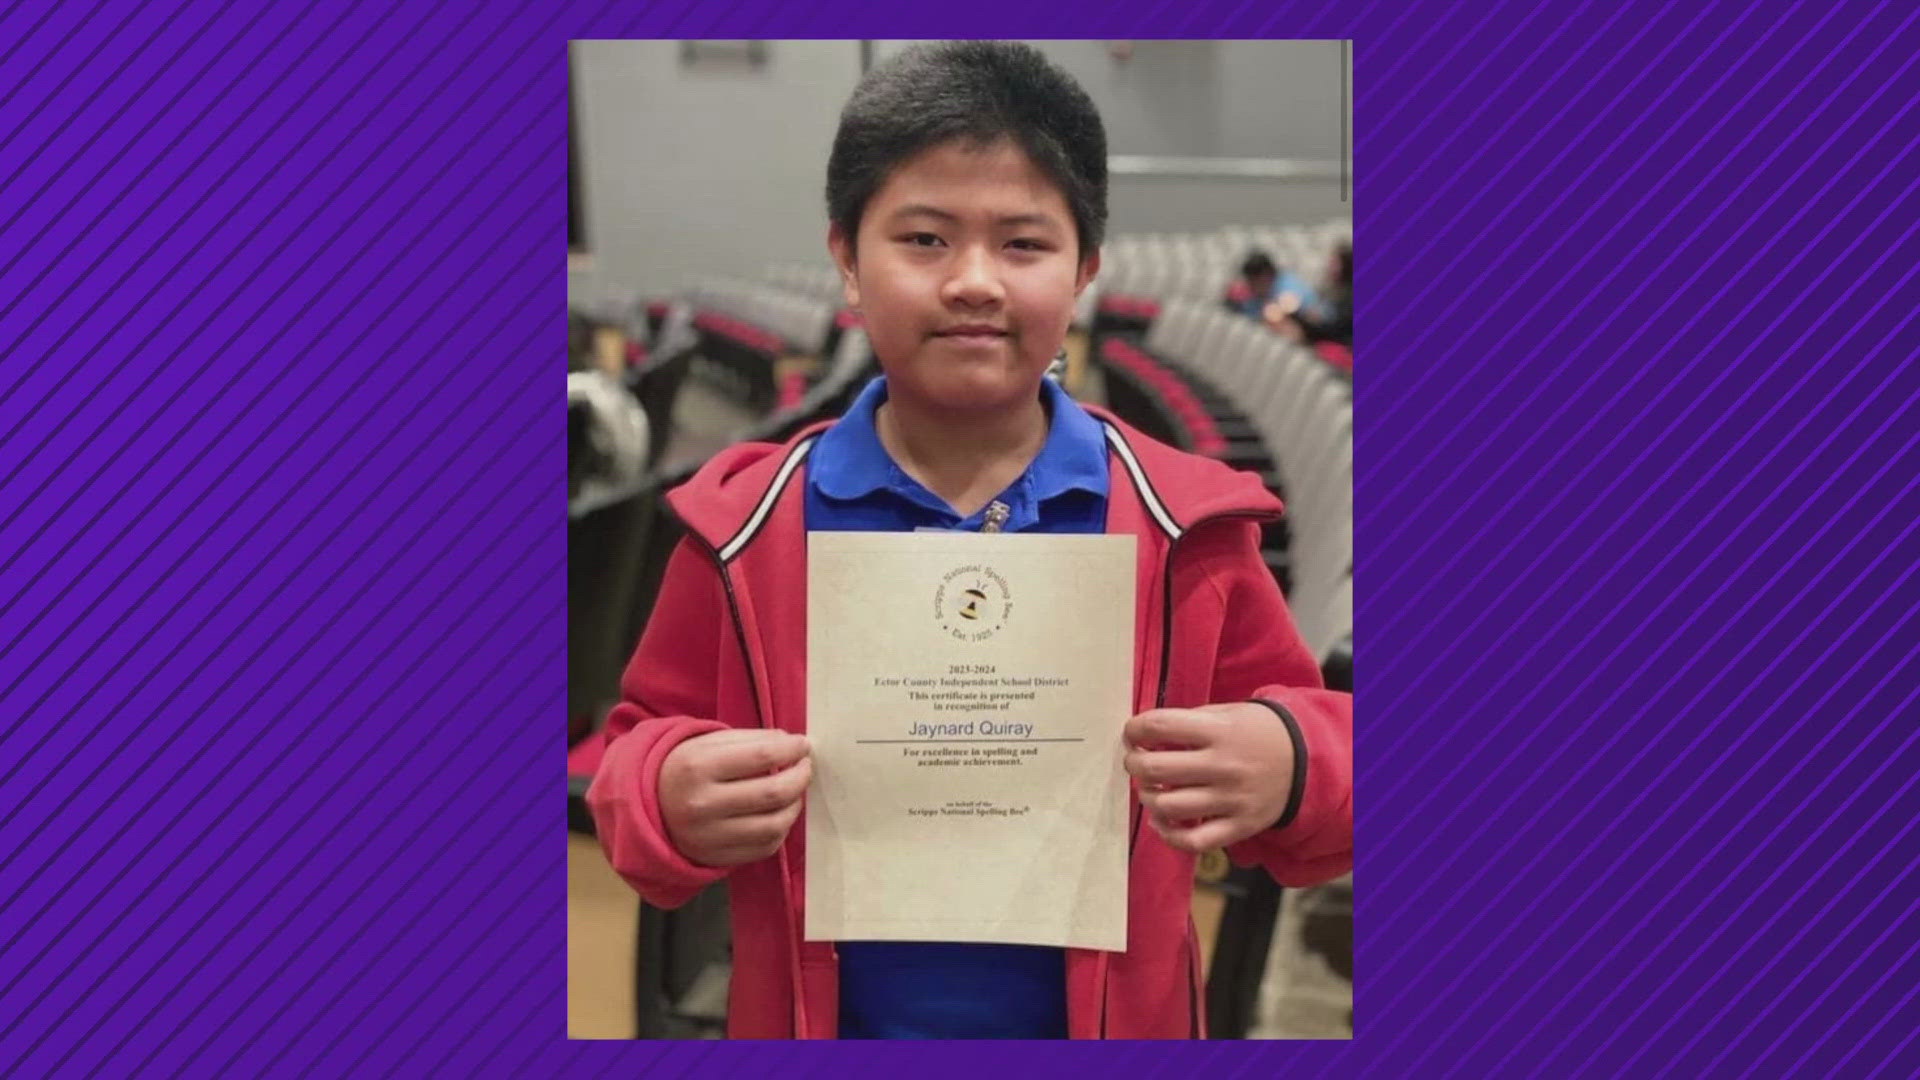 "Never give up, you never know if you could reach that goal or not," said Jaynard Quiray. He's competing against 245 students across the country in Washington D.C.